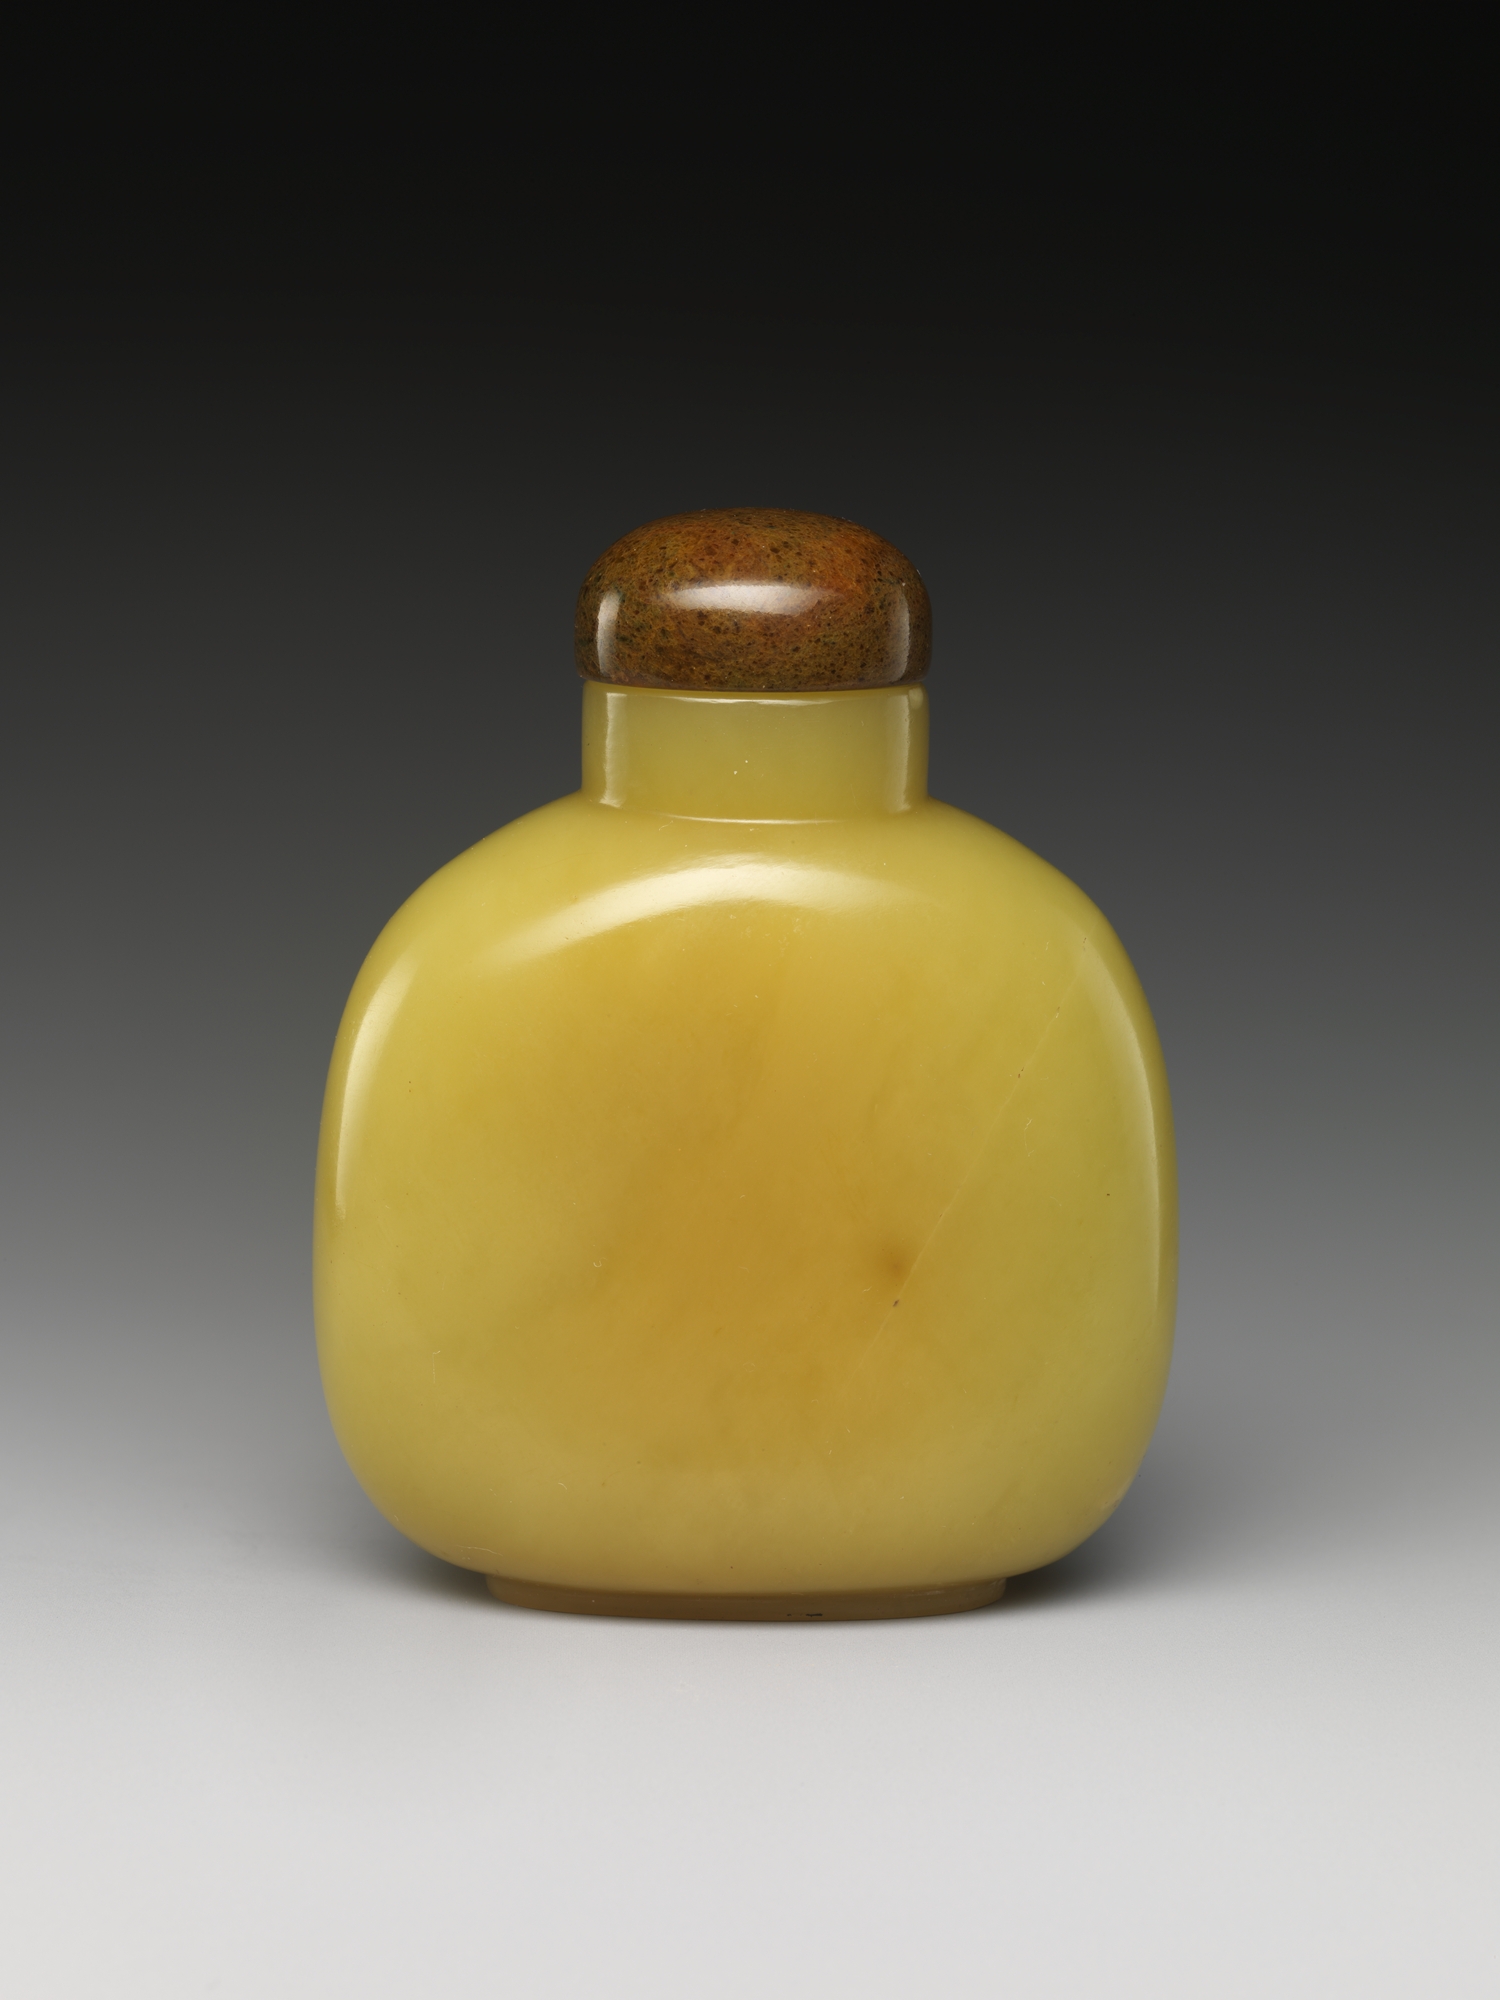 Snuff bottles with figures in landscape, China, Qing dynasty (1644–1911)